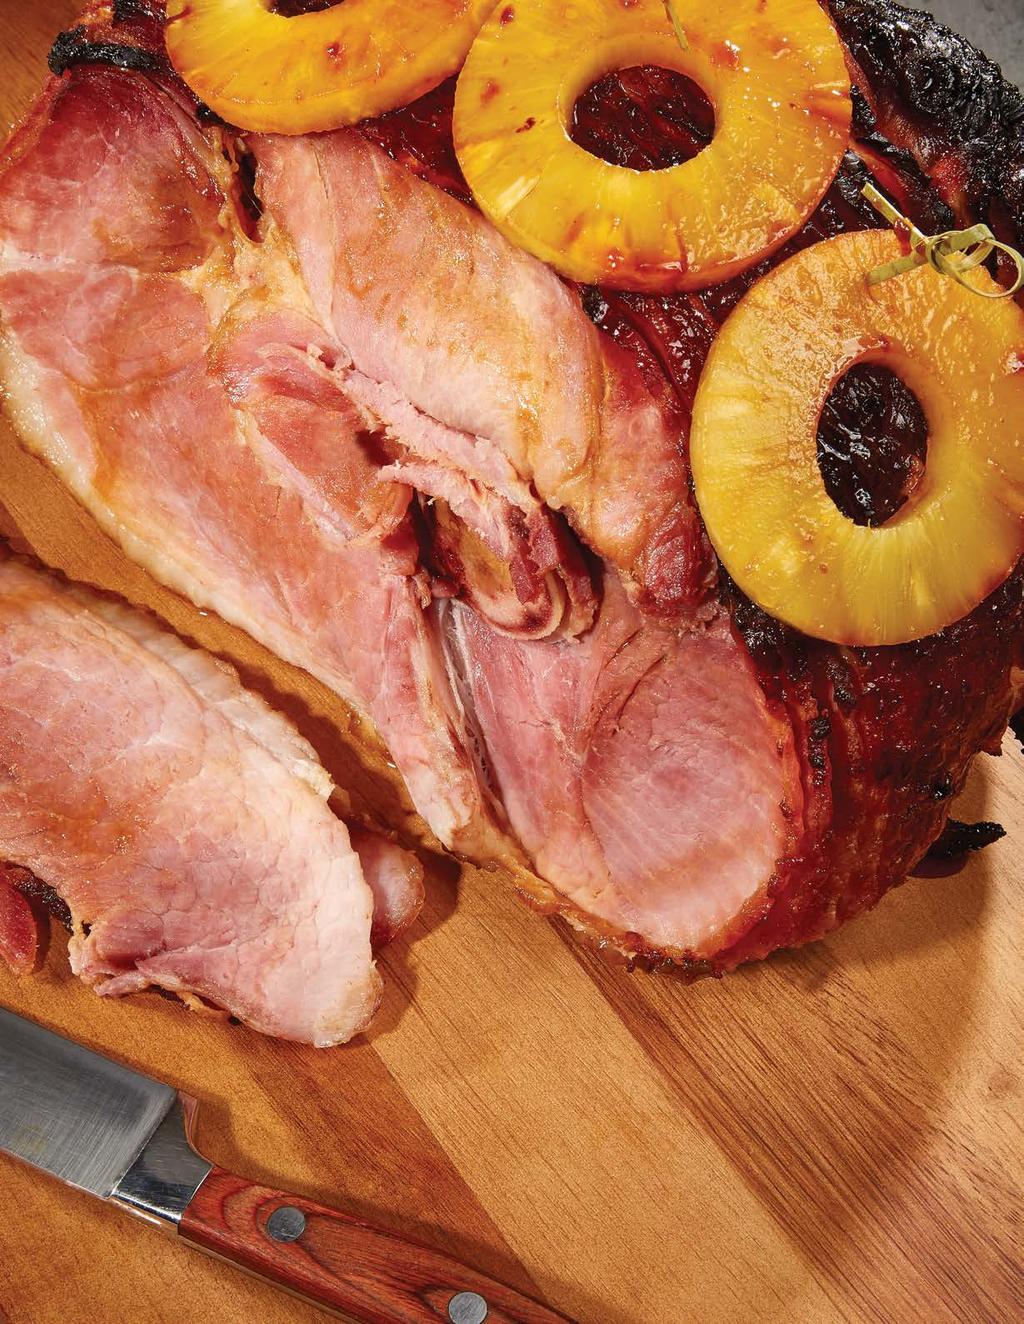 SERVES 6-8 Pineapple- Glazed Ham ½ cup brown sugar 2 tbsp. molasses 1 (46 oz.) can pineapple rings (reserve juice) ½ cup brown mustard 3 tbsp. dry hot mustard 1 tsp. cloves, ground 1.